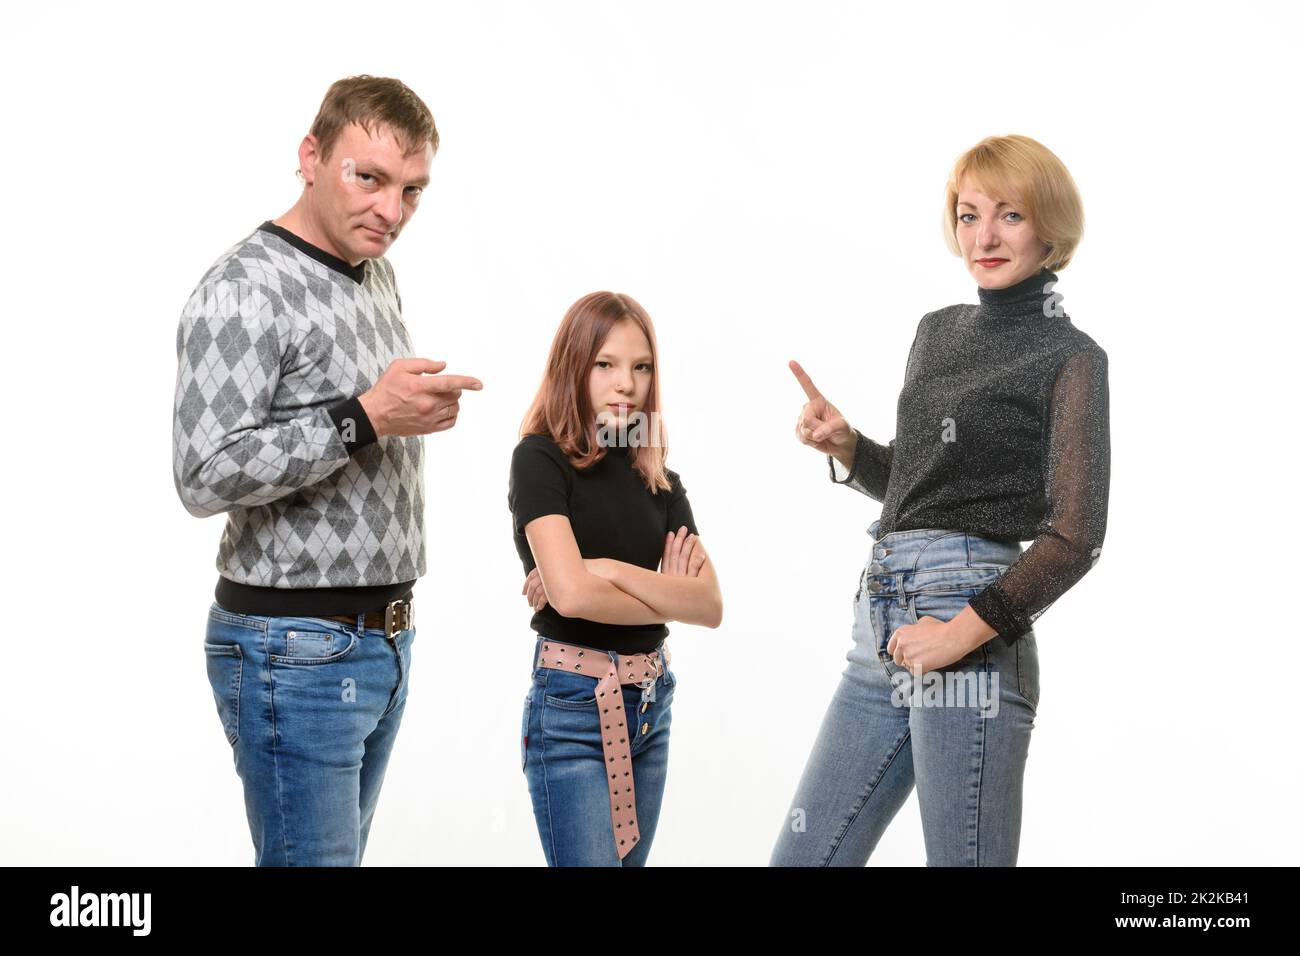 Mom and dad scold daughter Stock Photo